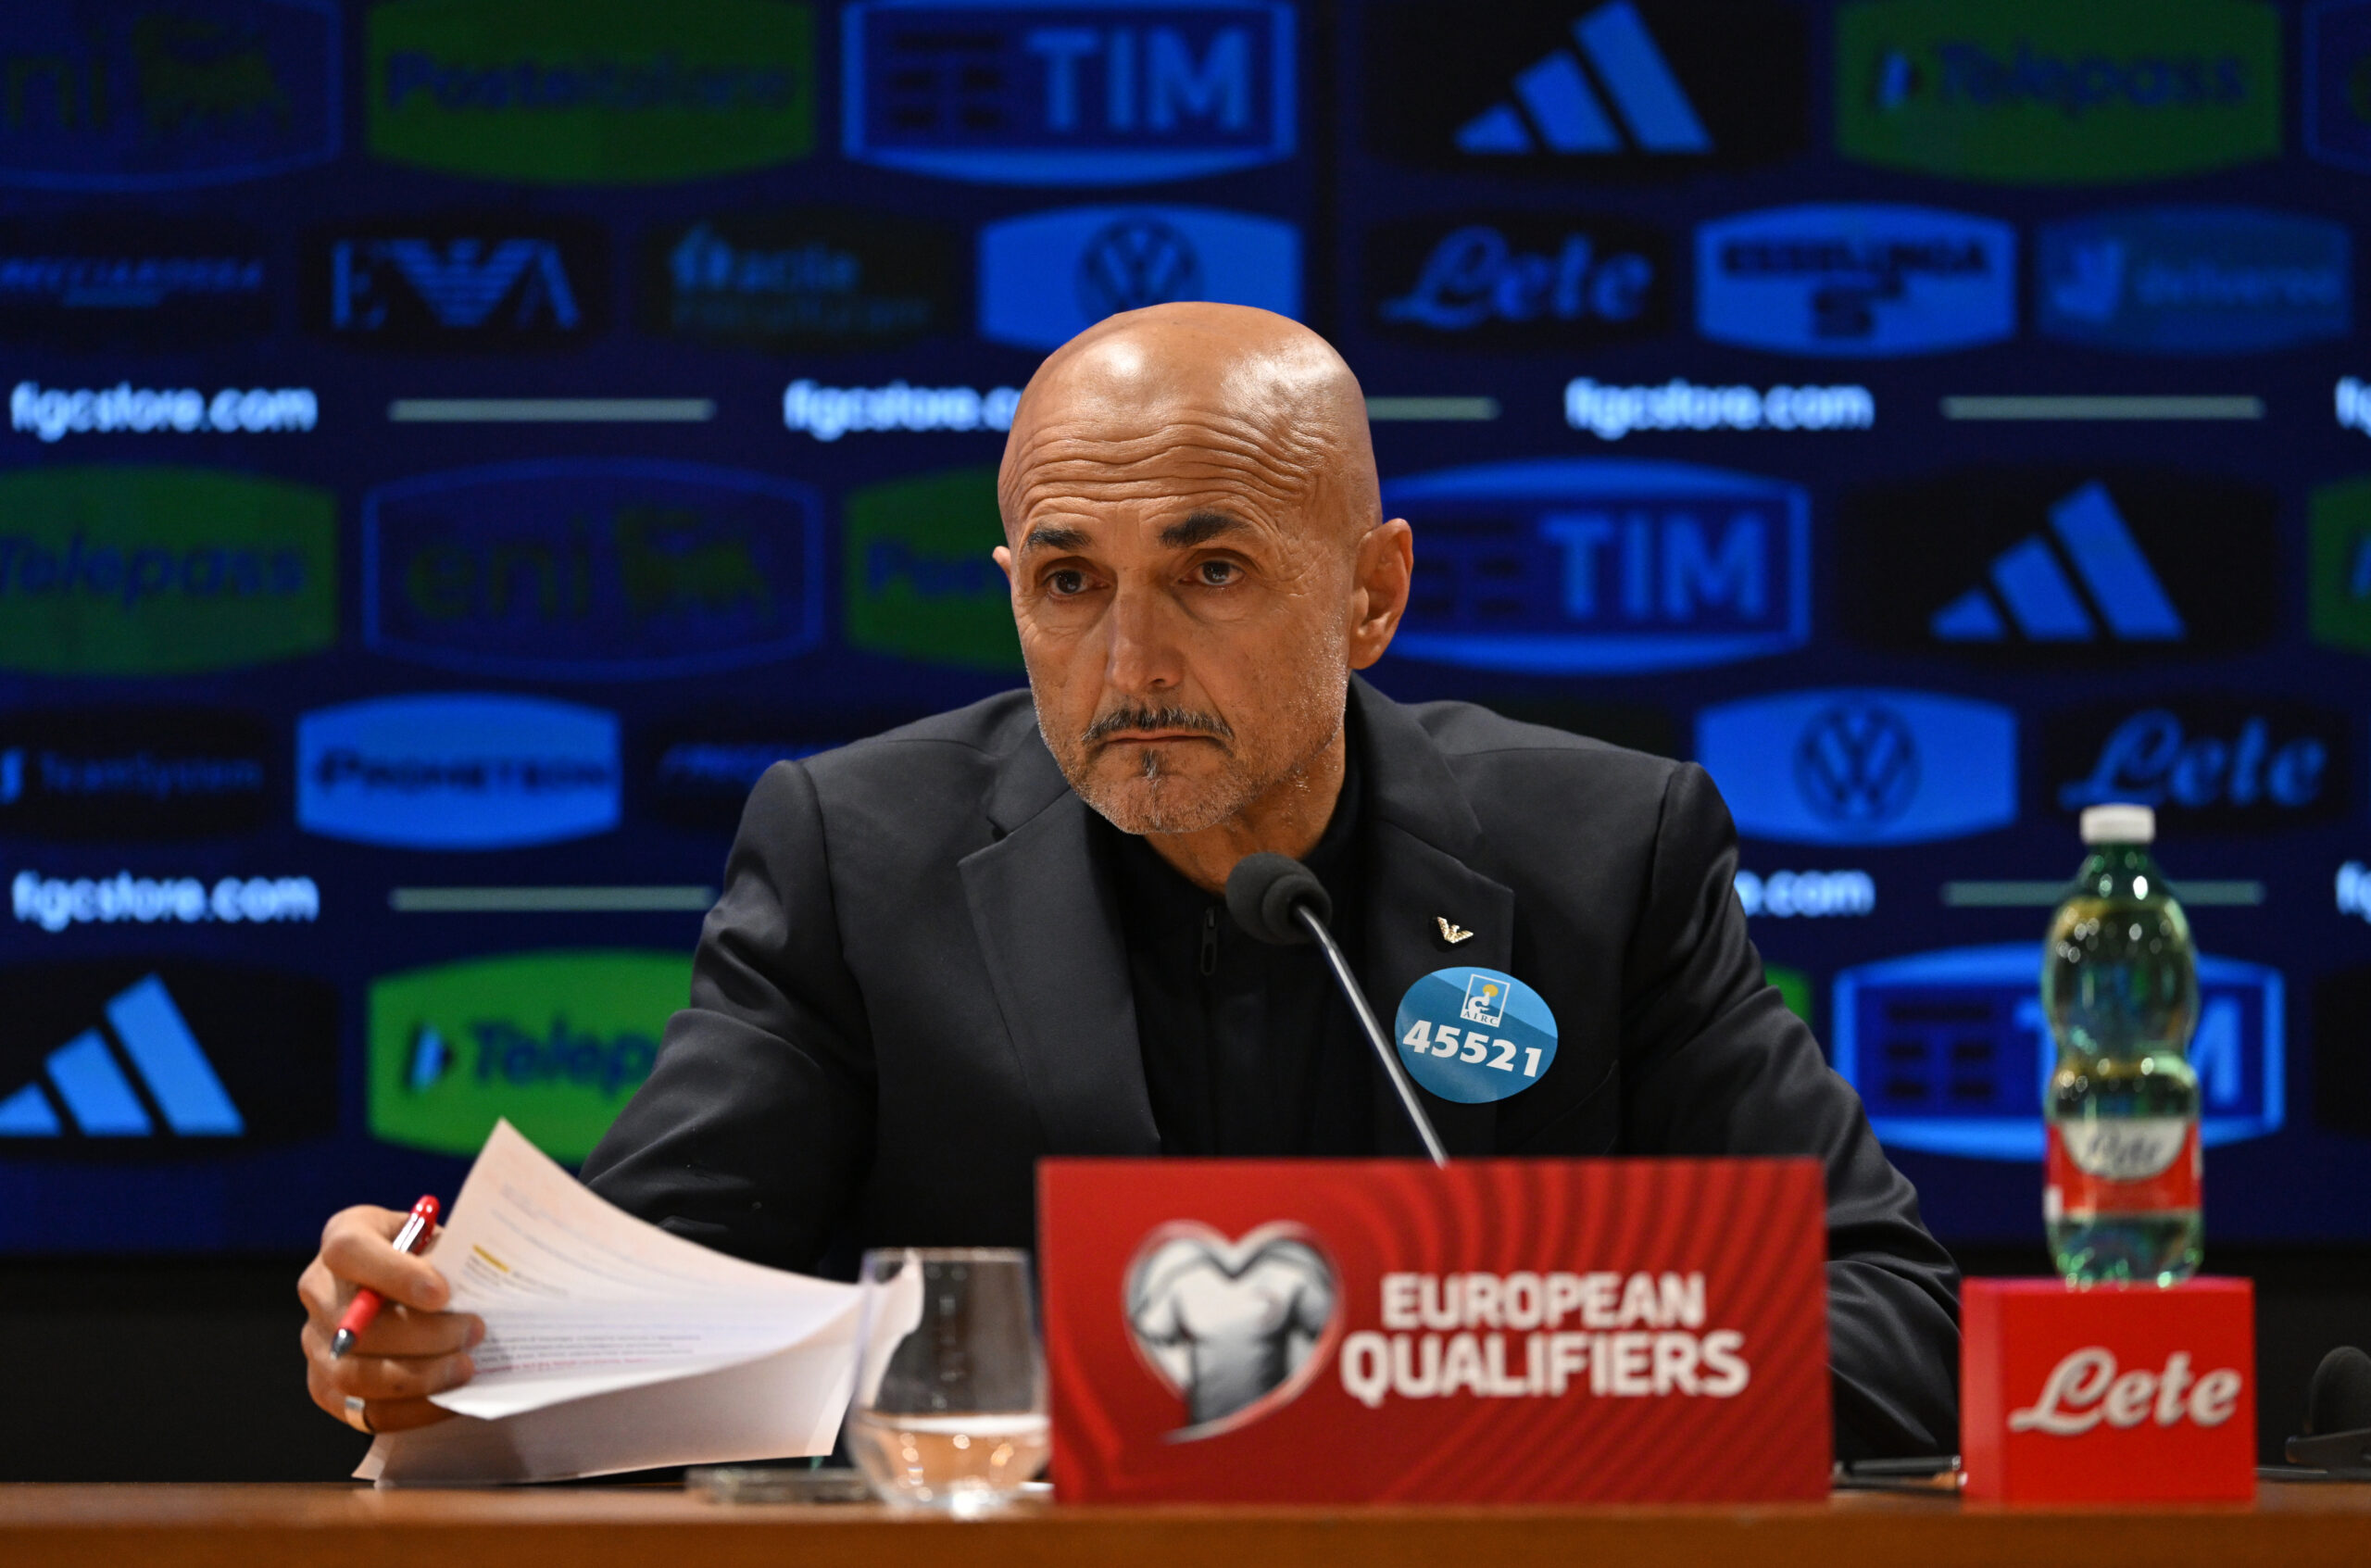 Luciano Spalletti has issued the final squad list for the Ukraine game, where Italy will need to avoid losing to finish second and qualify for Euro 2024.